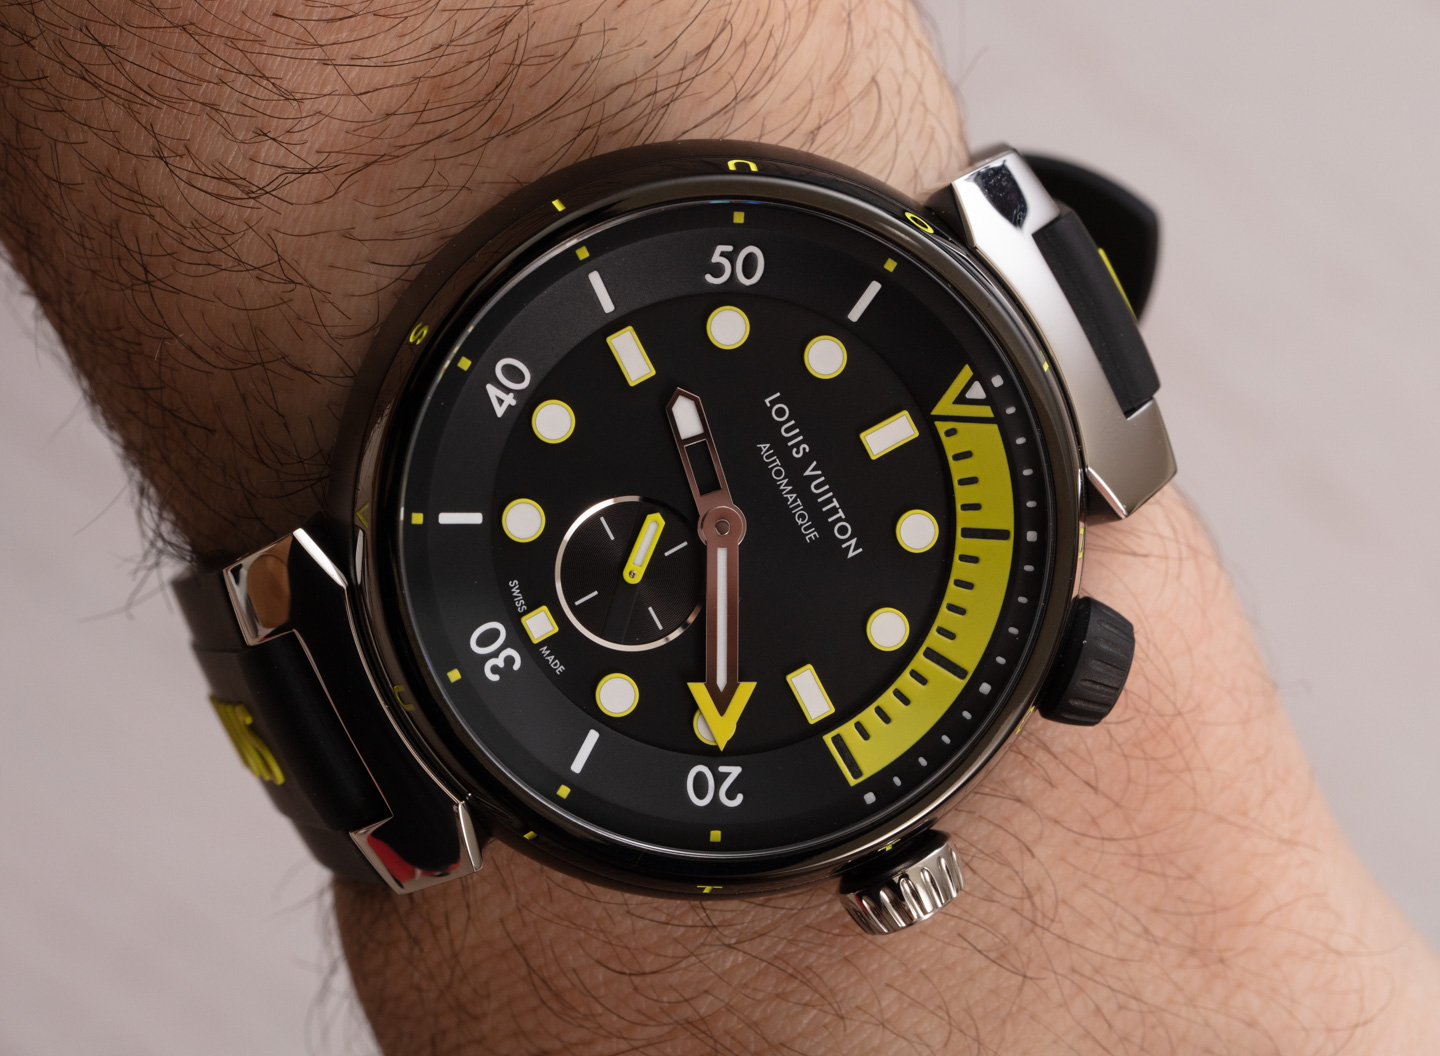 Louis Vuitton Adds a Chrono to Its Sporty Tambour Street Diver Watches